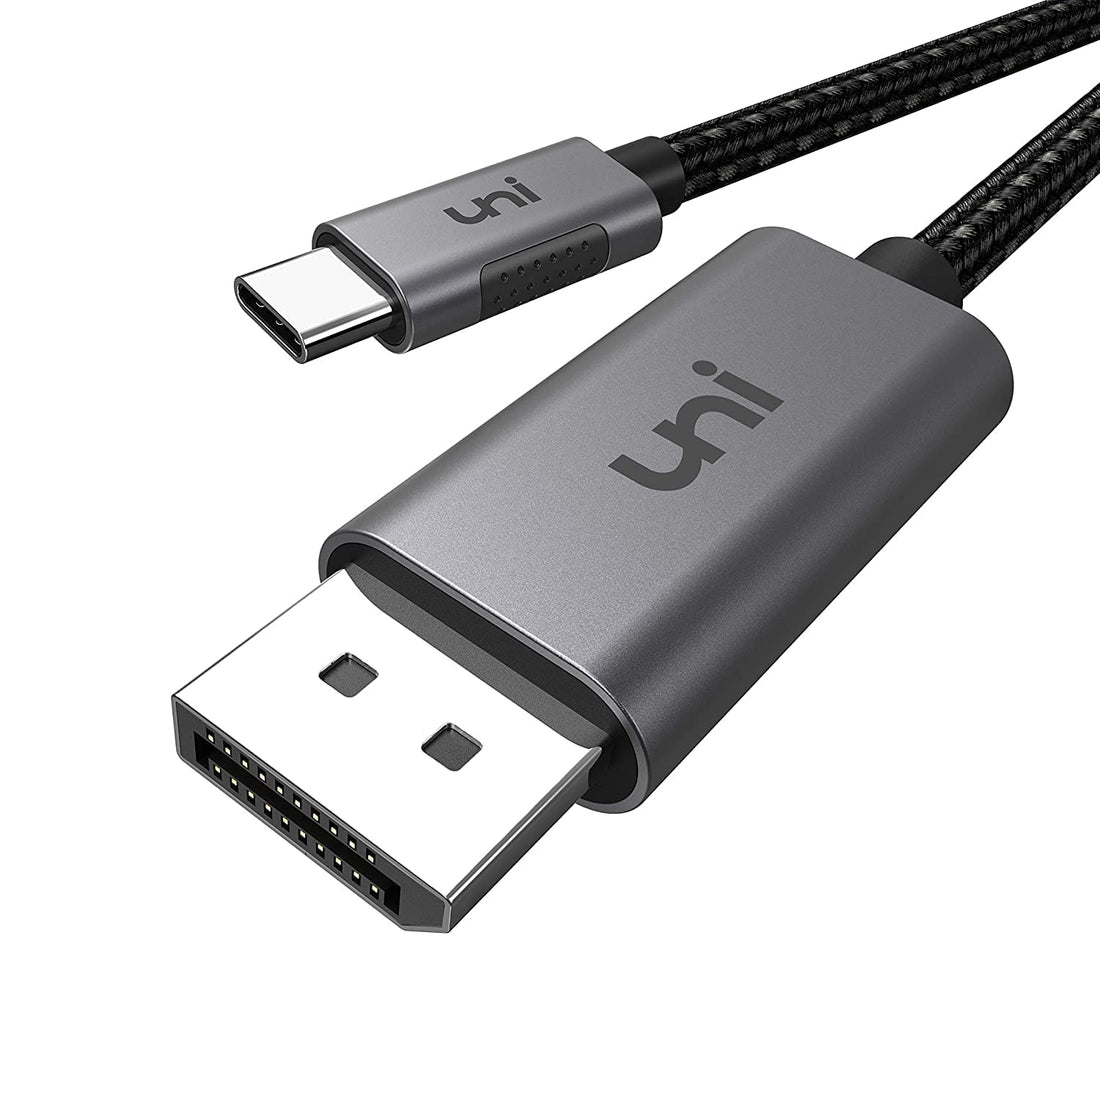 Uni Usb C To Displayport (4K@60Hz), Thunderbolt 3 Cable For Monitor, Tablet, Personal Computer, Laptop, Television, Smartphone - Grey, 6Ft, Not Hdmi